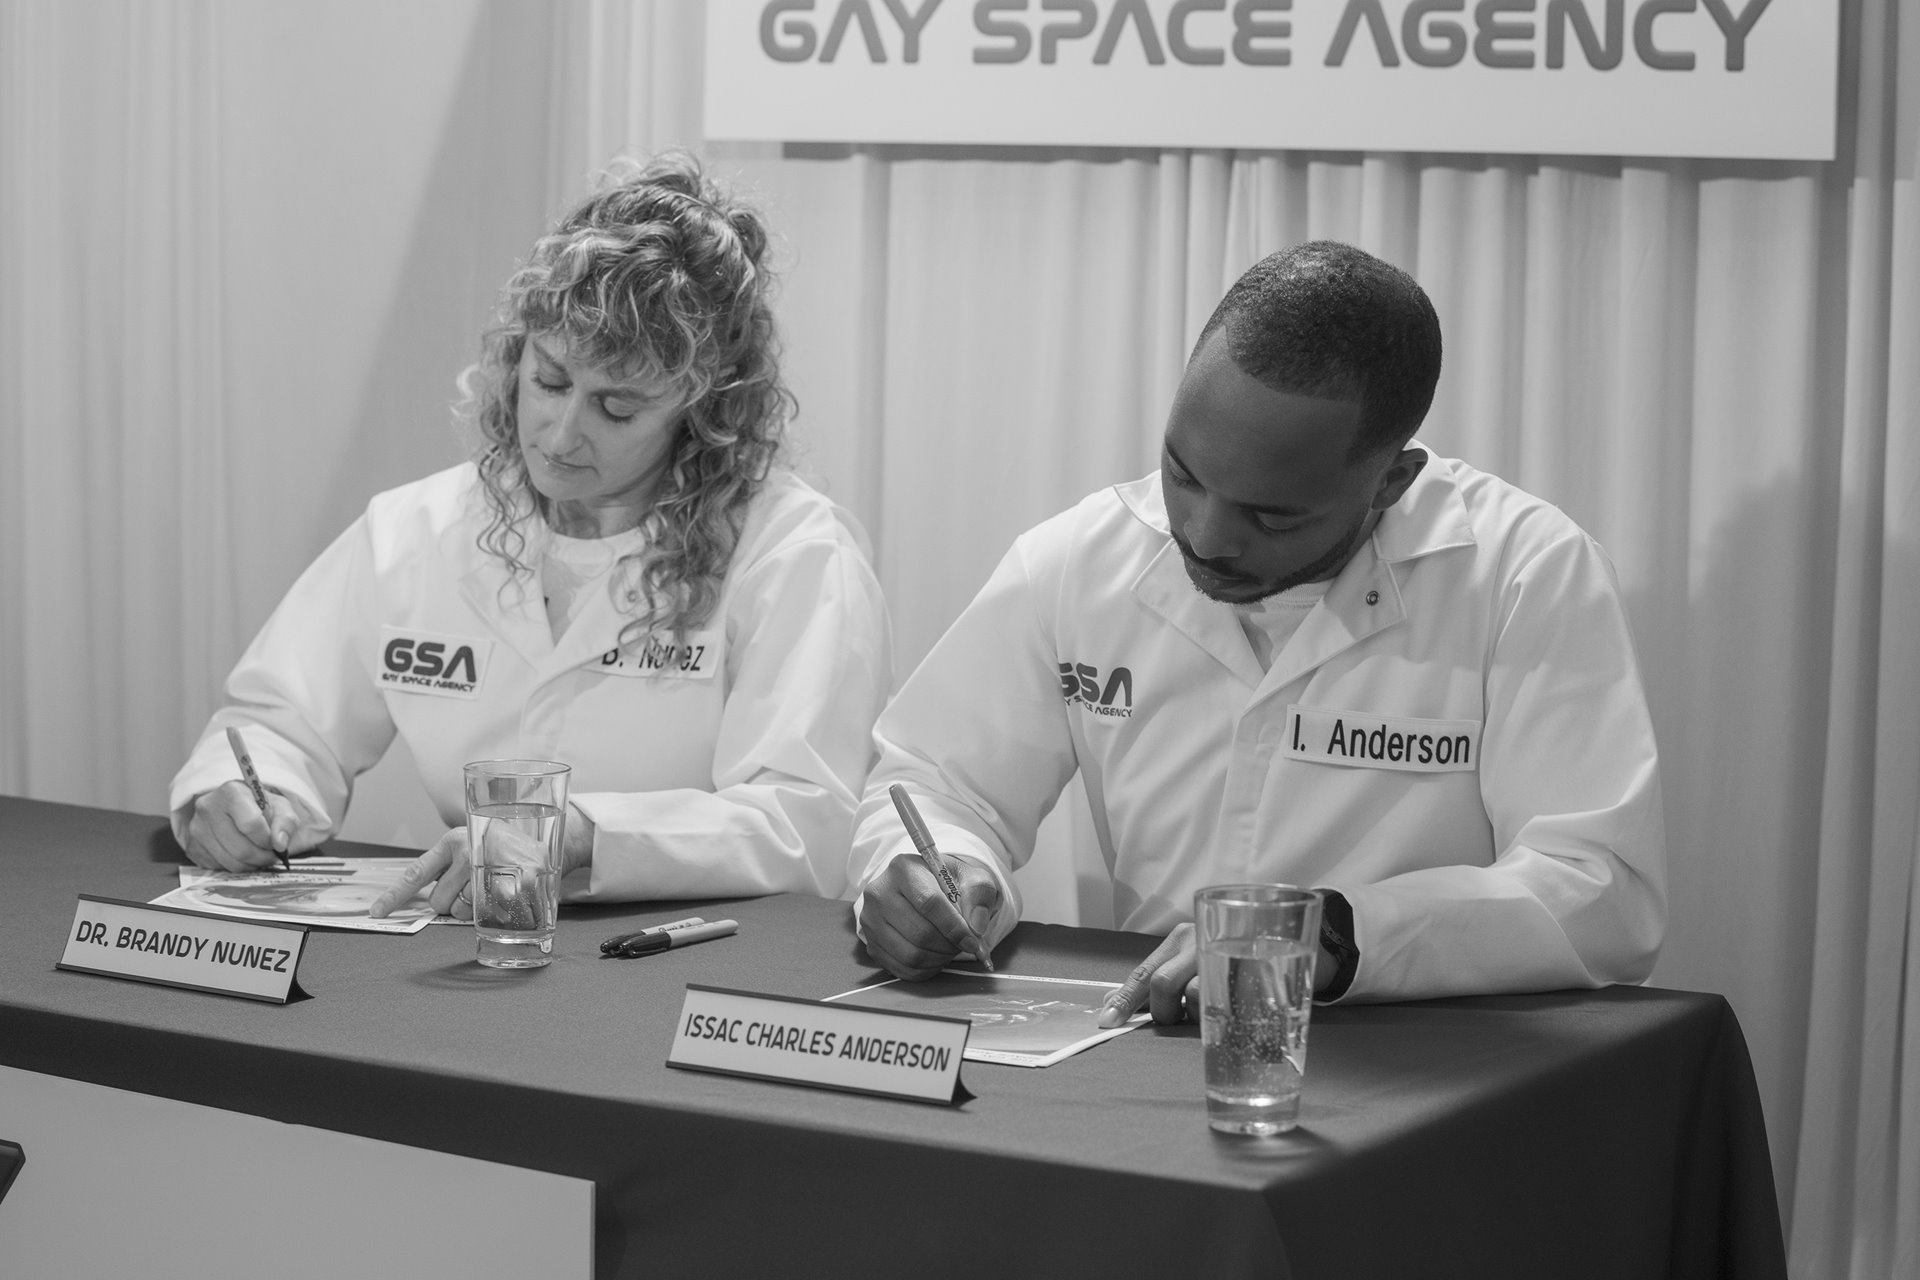 Dr. Brandy Nunez and Issac Charles Anderson, the first crew of the fictional Gay Space Agency, signing autographs in New York, United States. Dr. Nunez and Anderson are real-life LGBTQI+ aspiring astronauts, participating in civilian astronaut training with the nonprofit, Out Astronaut.